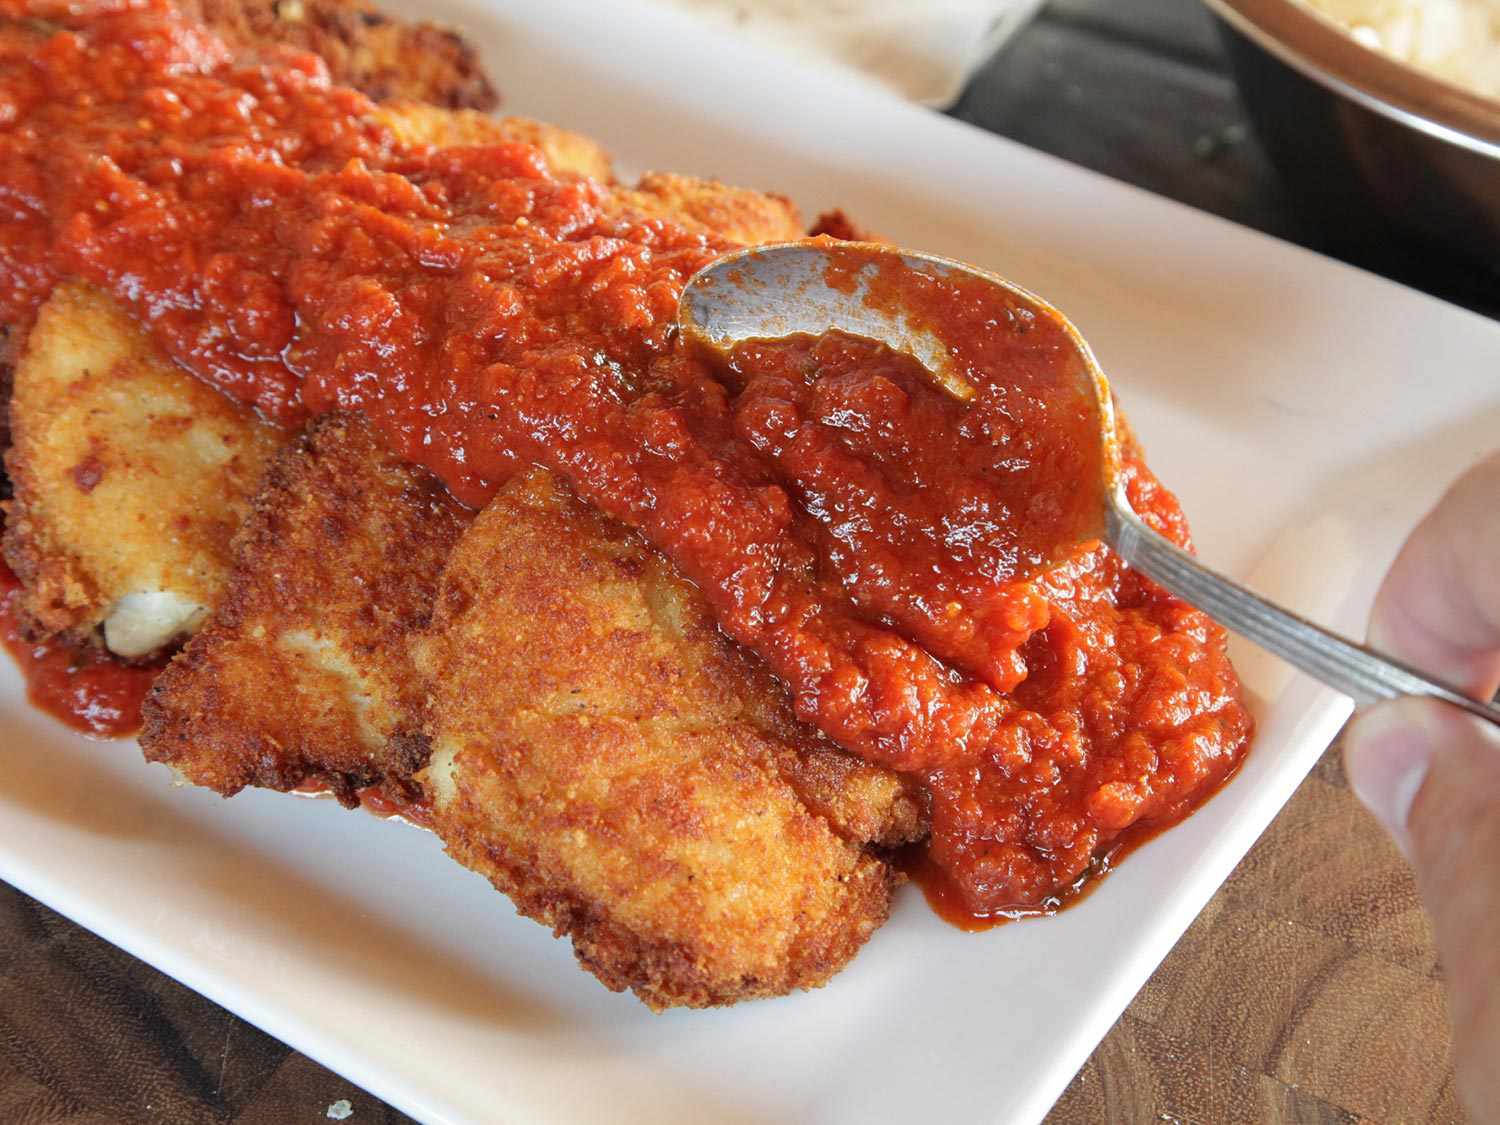 Spooning red sauce over fried chicken breasts